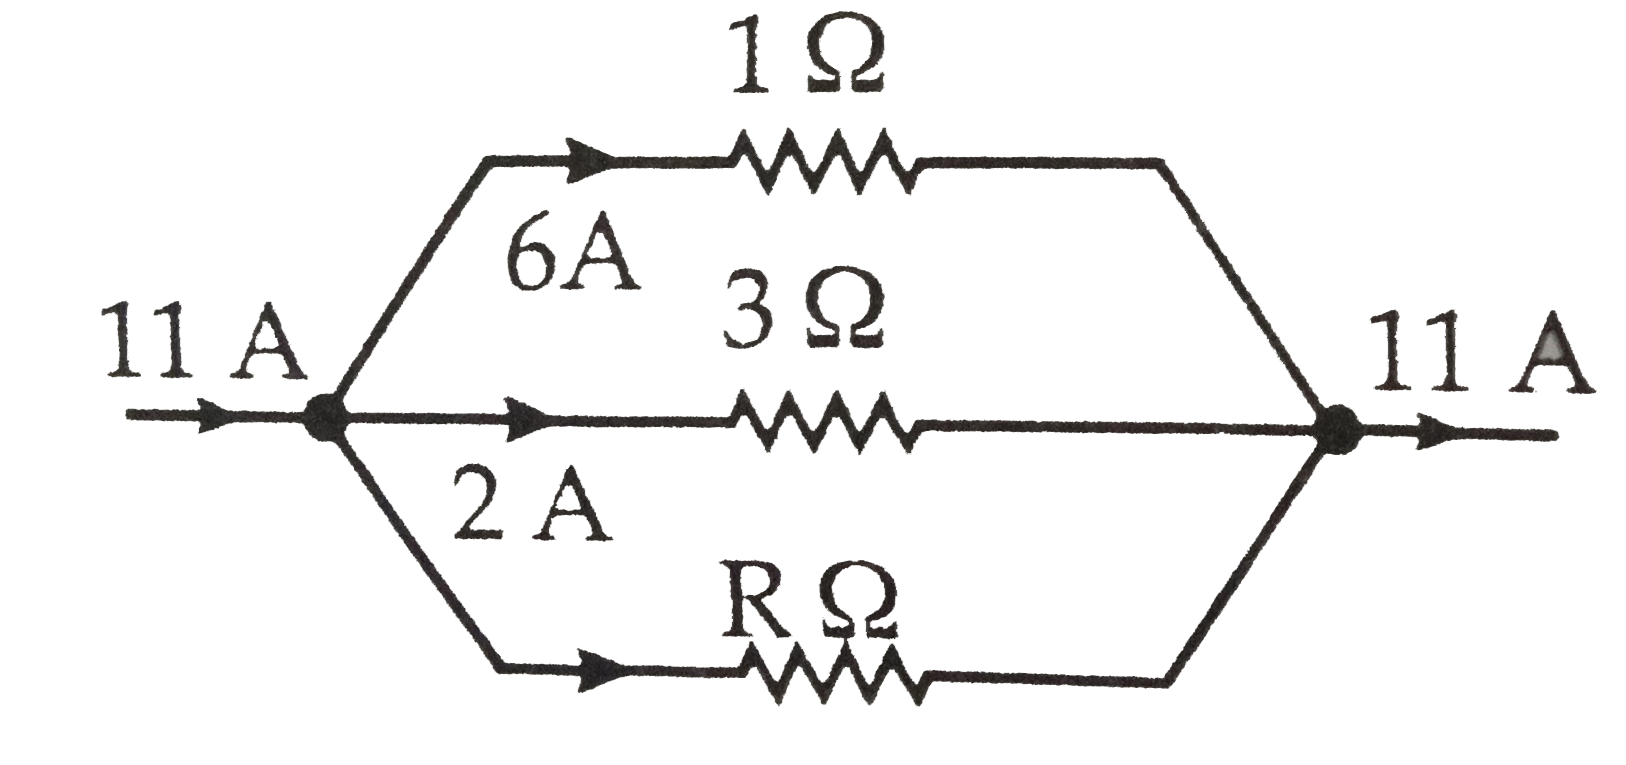 In the circuit shown in figure, the value of R is